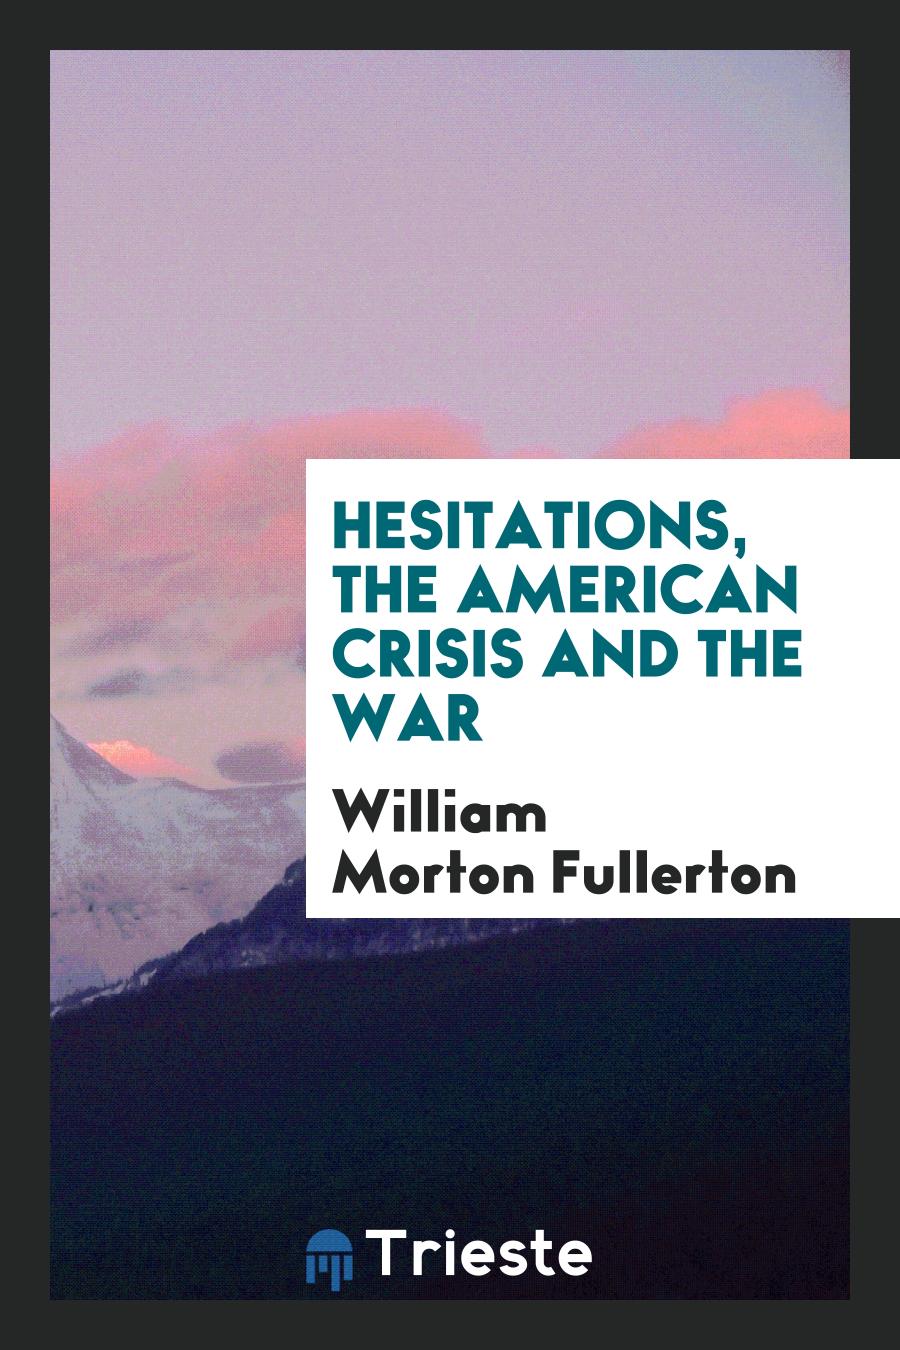 Hesitations, the American Crisis and the War